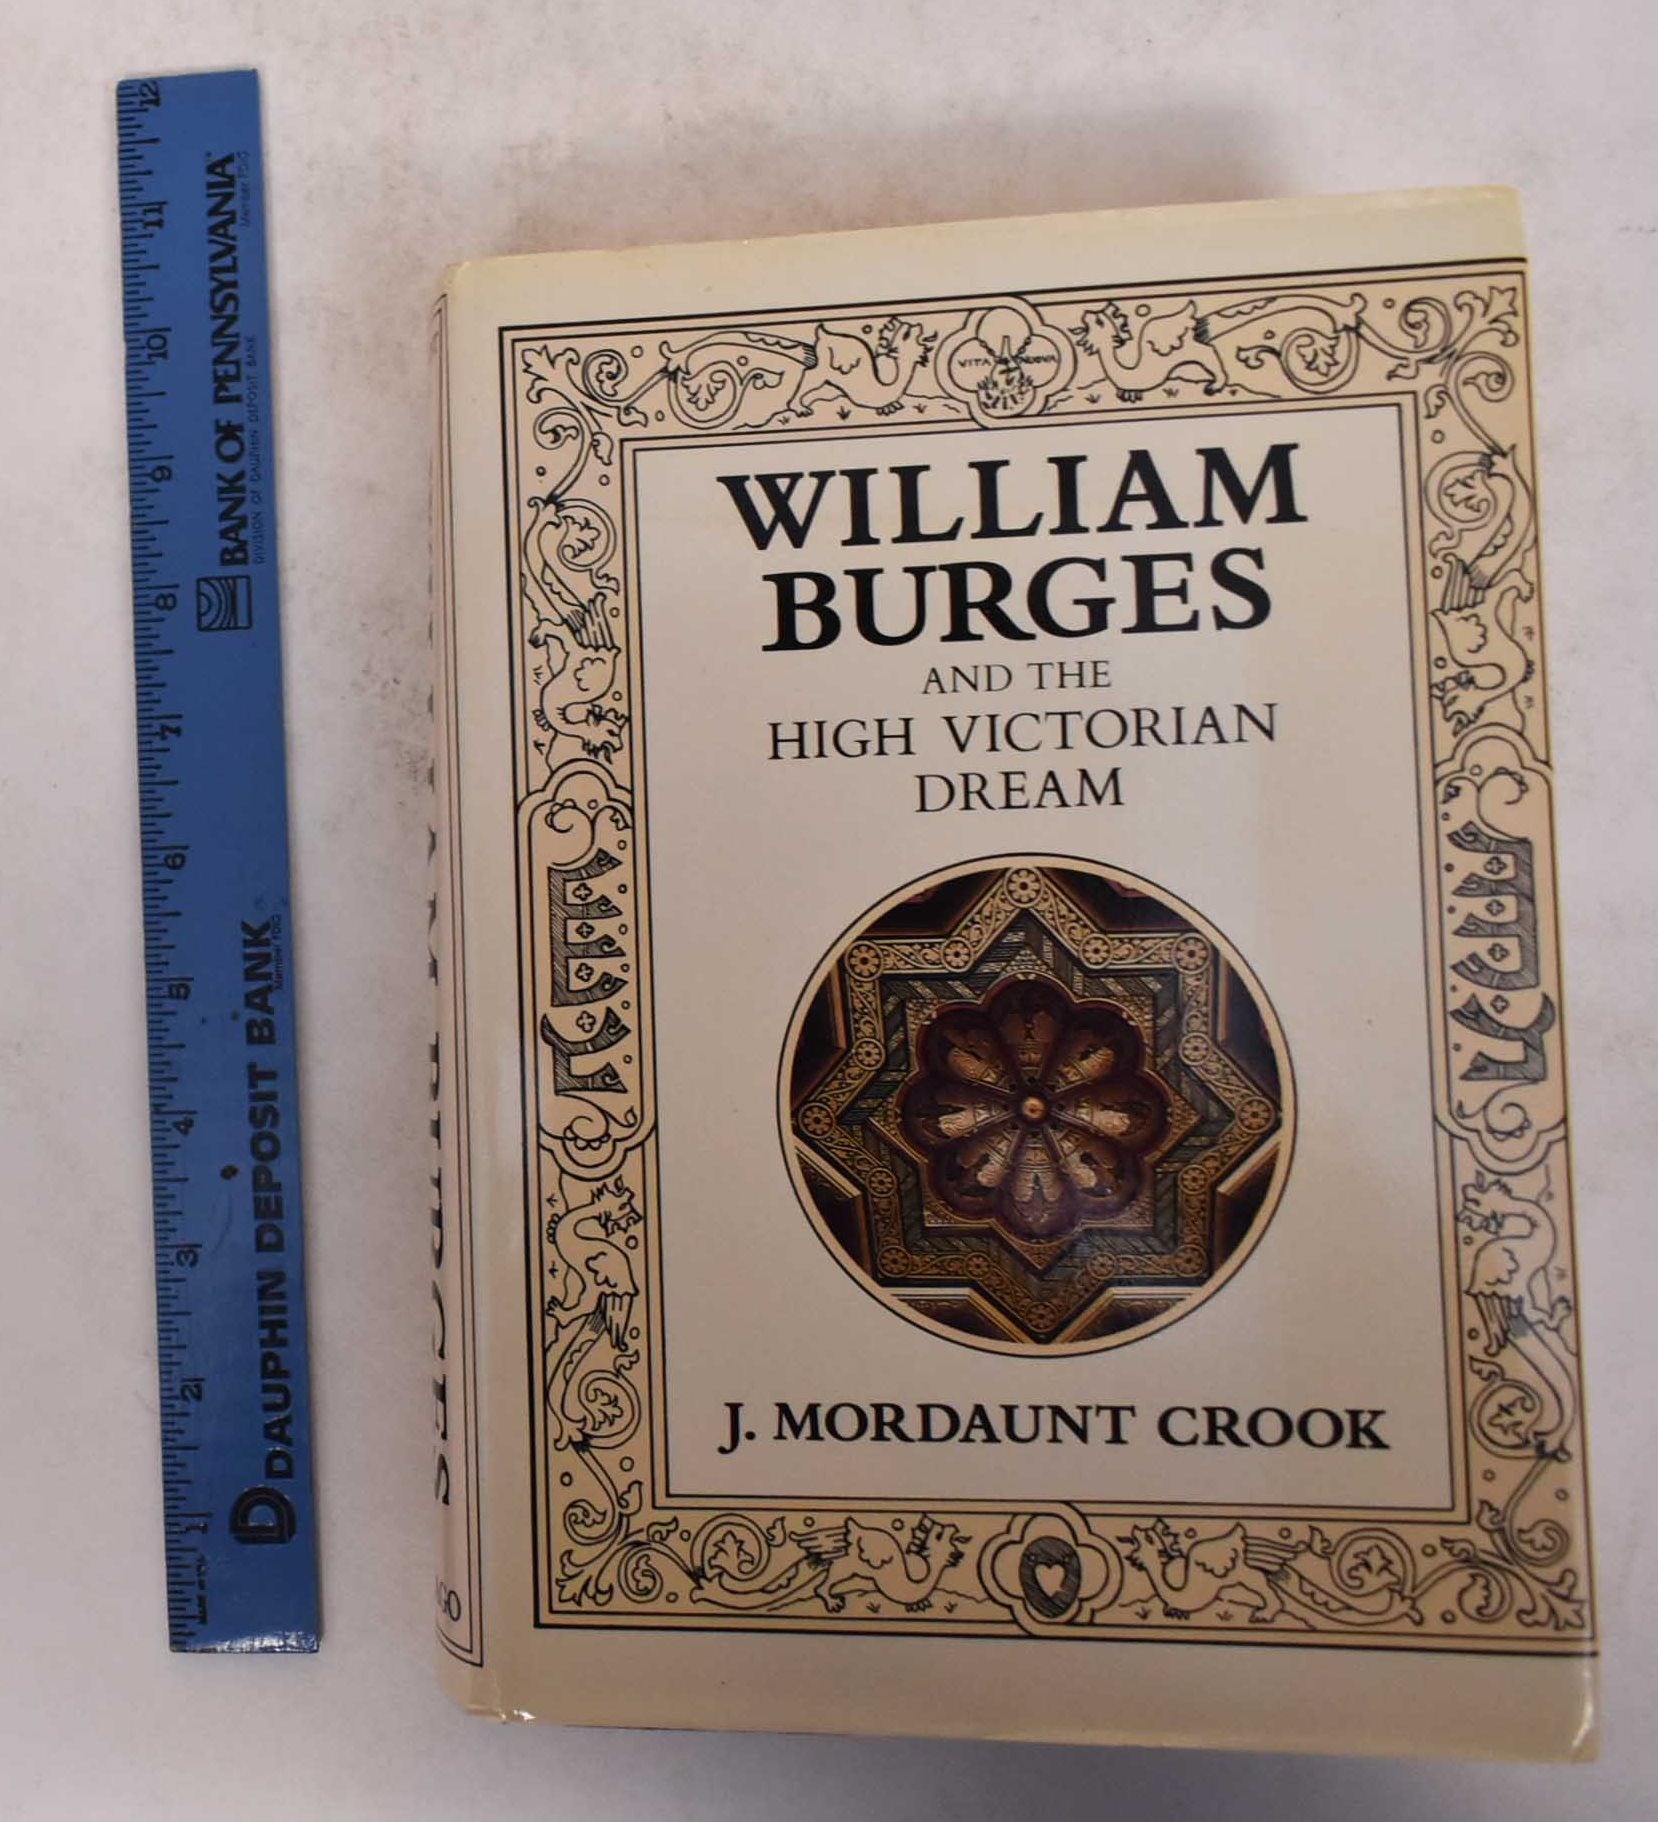 Crook, J. Mordaunt - William Burges and the High Victorian Dream